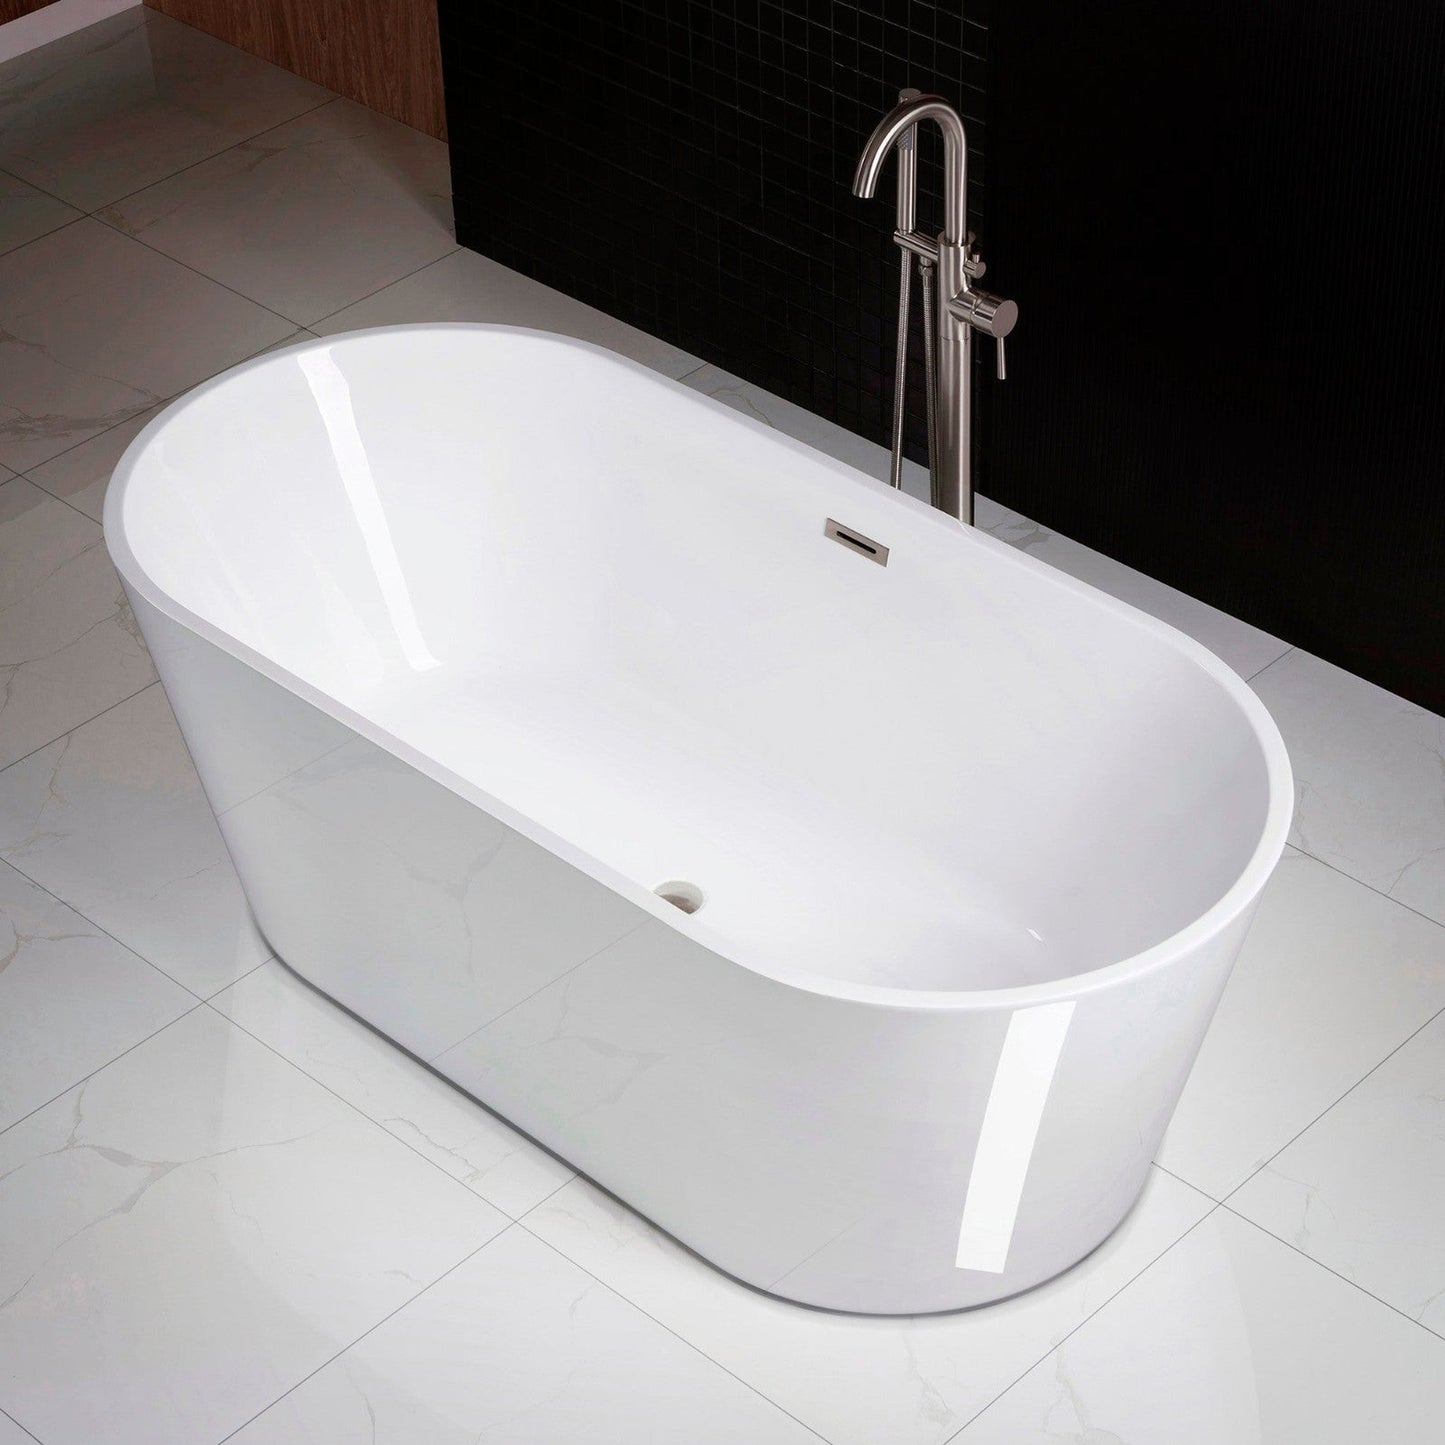 WoodBridge 71" White Acrylic Freestanding Contemporary Soaking Bathtub With Brushed Nickel Drain, Overflow, F0001BNSQ Tub Filler and Caddy Tray